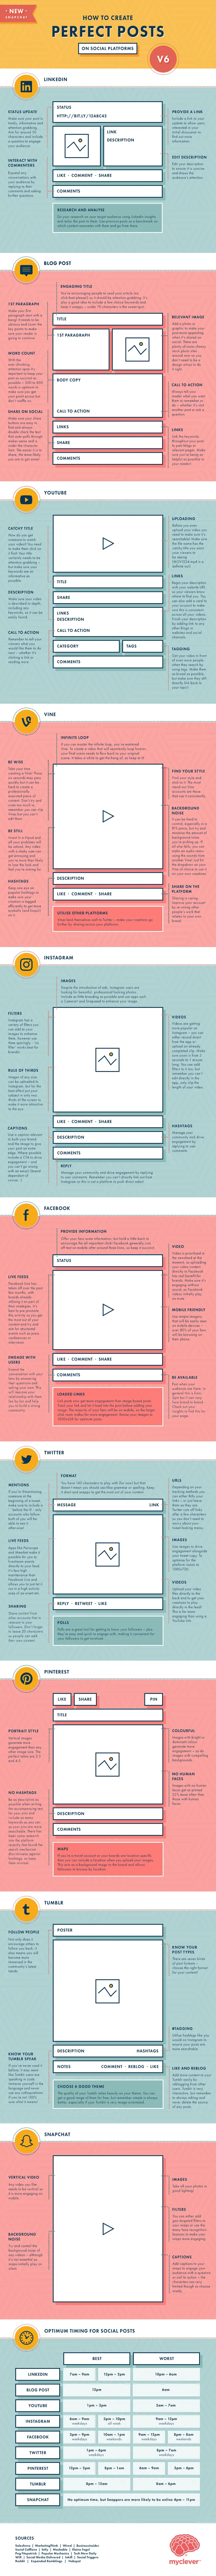 Infographic Perfect Posts